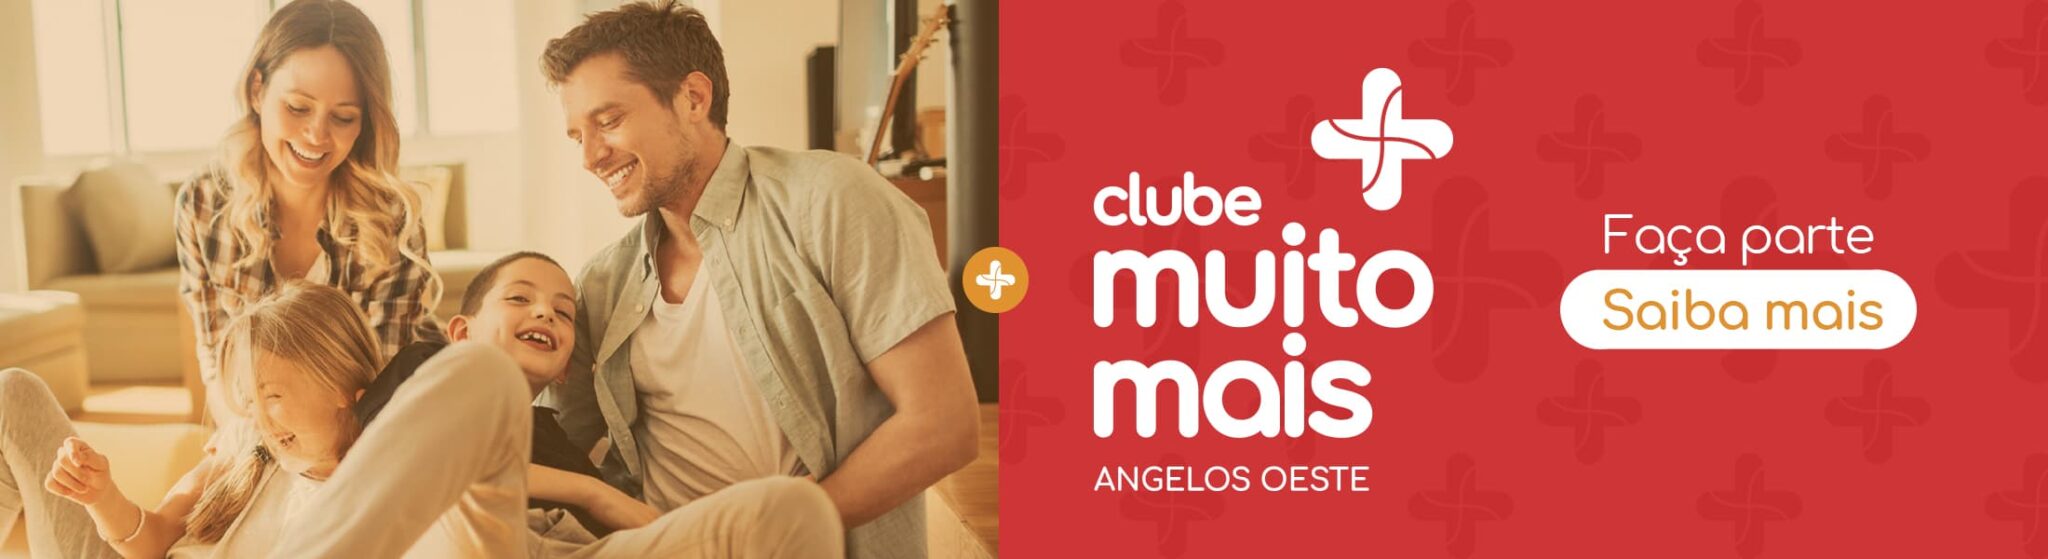 banner-site-angelus-clube-scaled